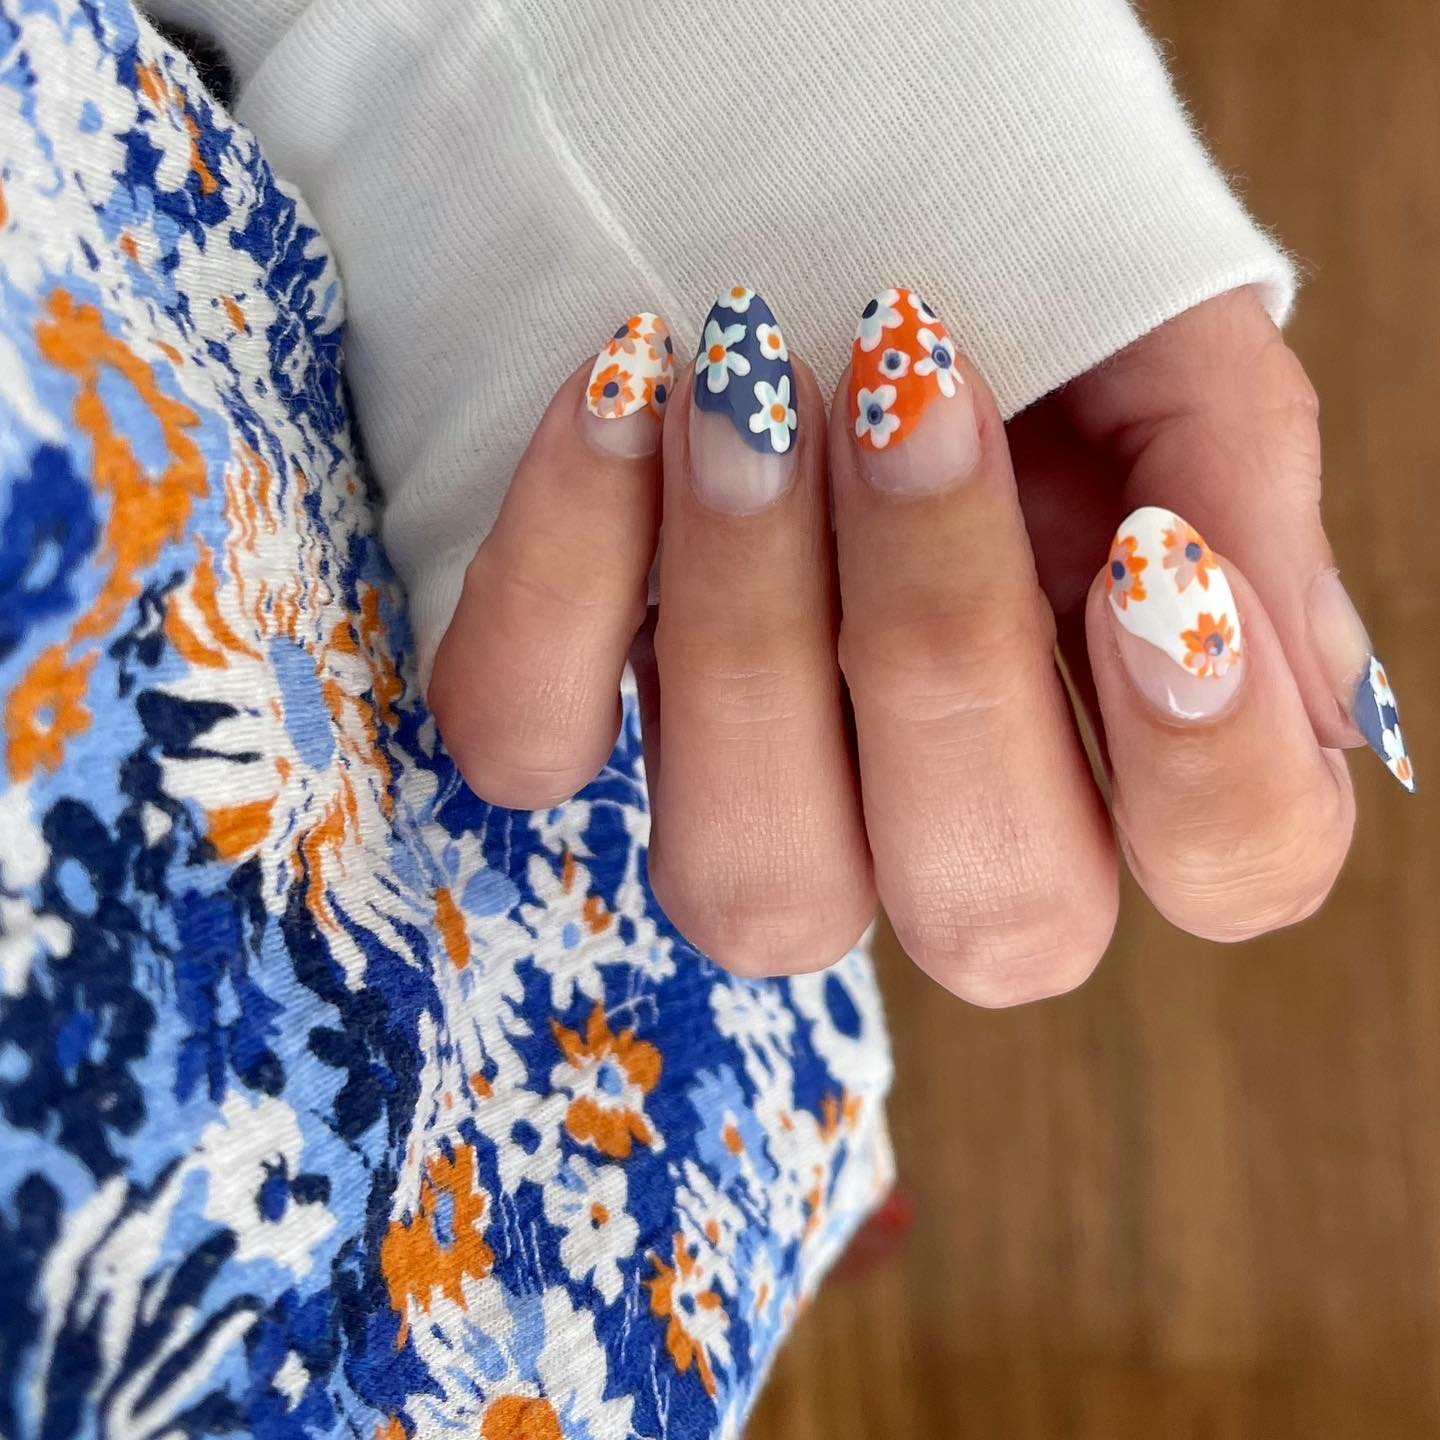 Spanish Woman 'Day of The Dead' for Nail Art (Water Decals)